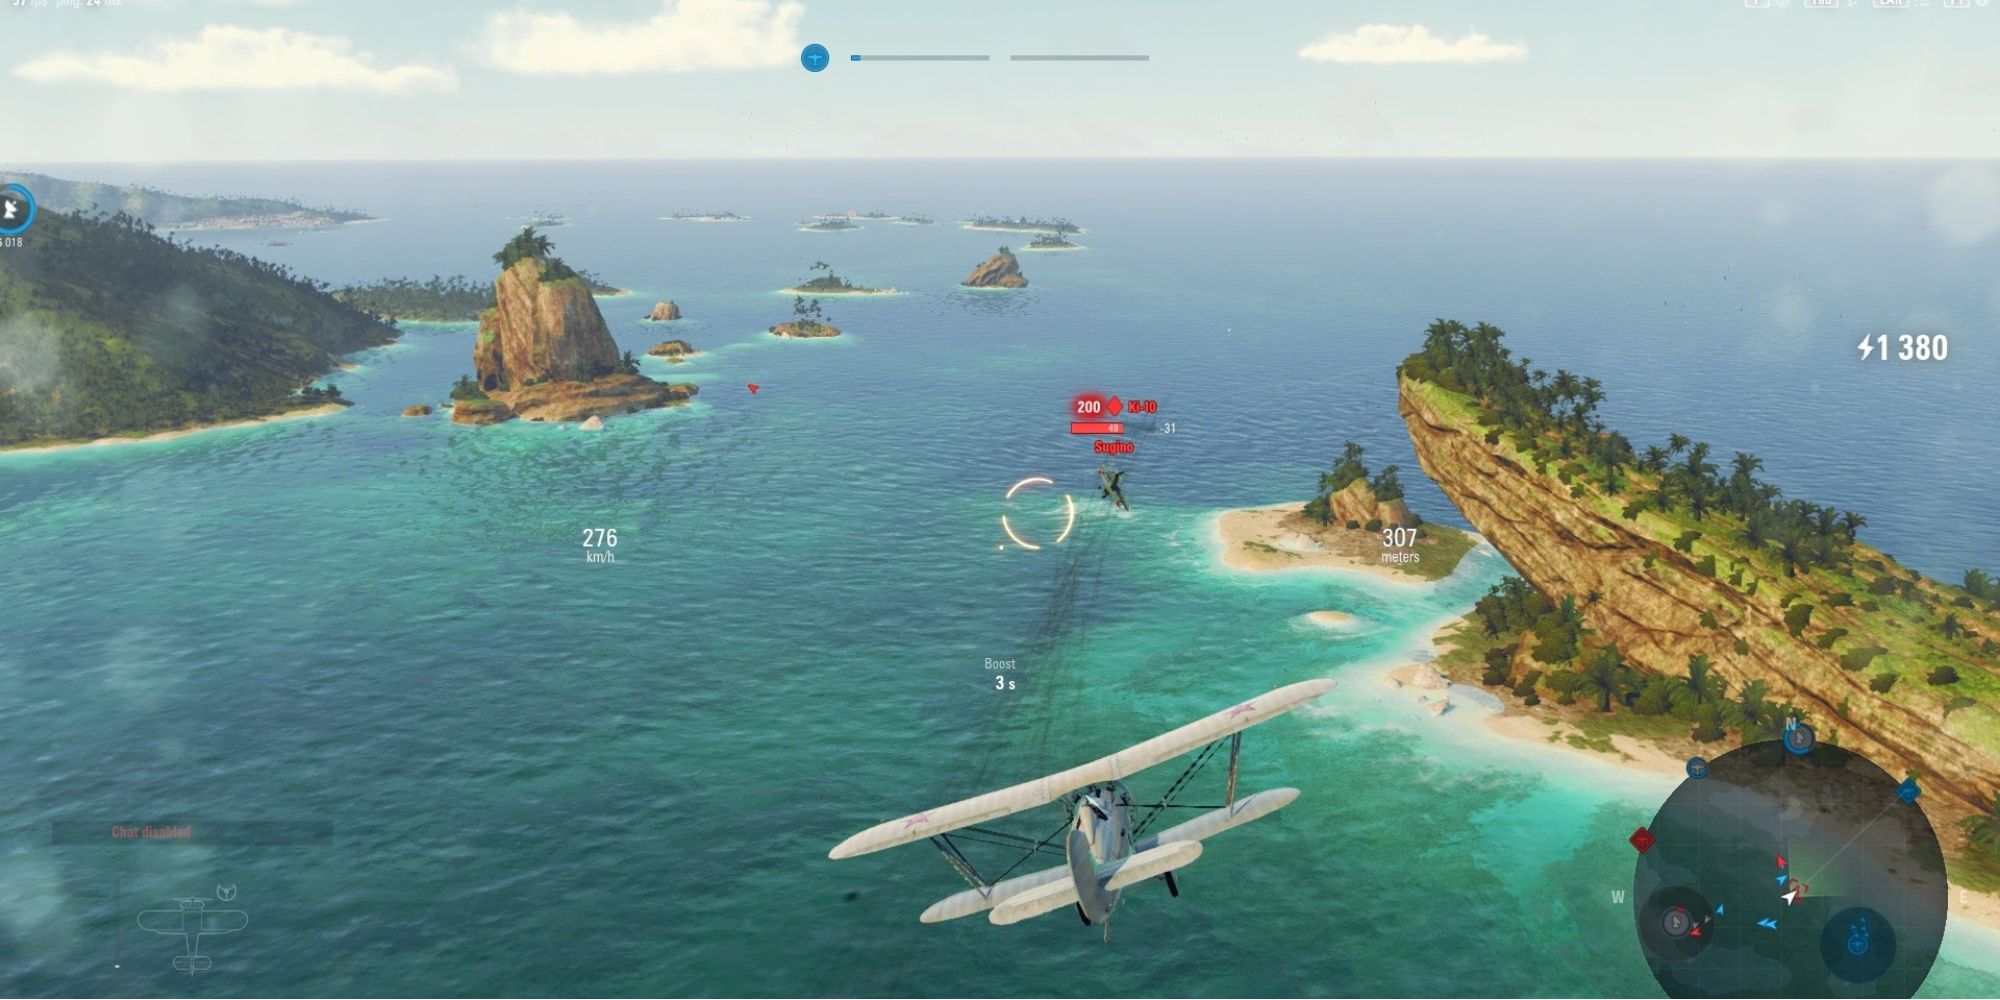 Free-to-play Games in 2022 - World of Warplanes - 1-5 SHKAS Pack - player flies fighter jet across an ocean